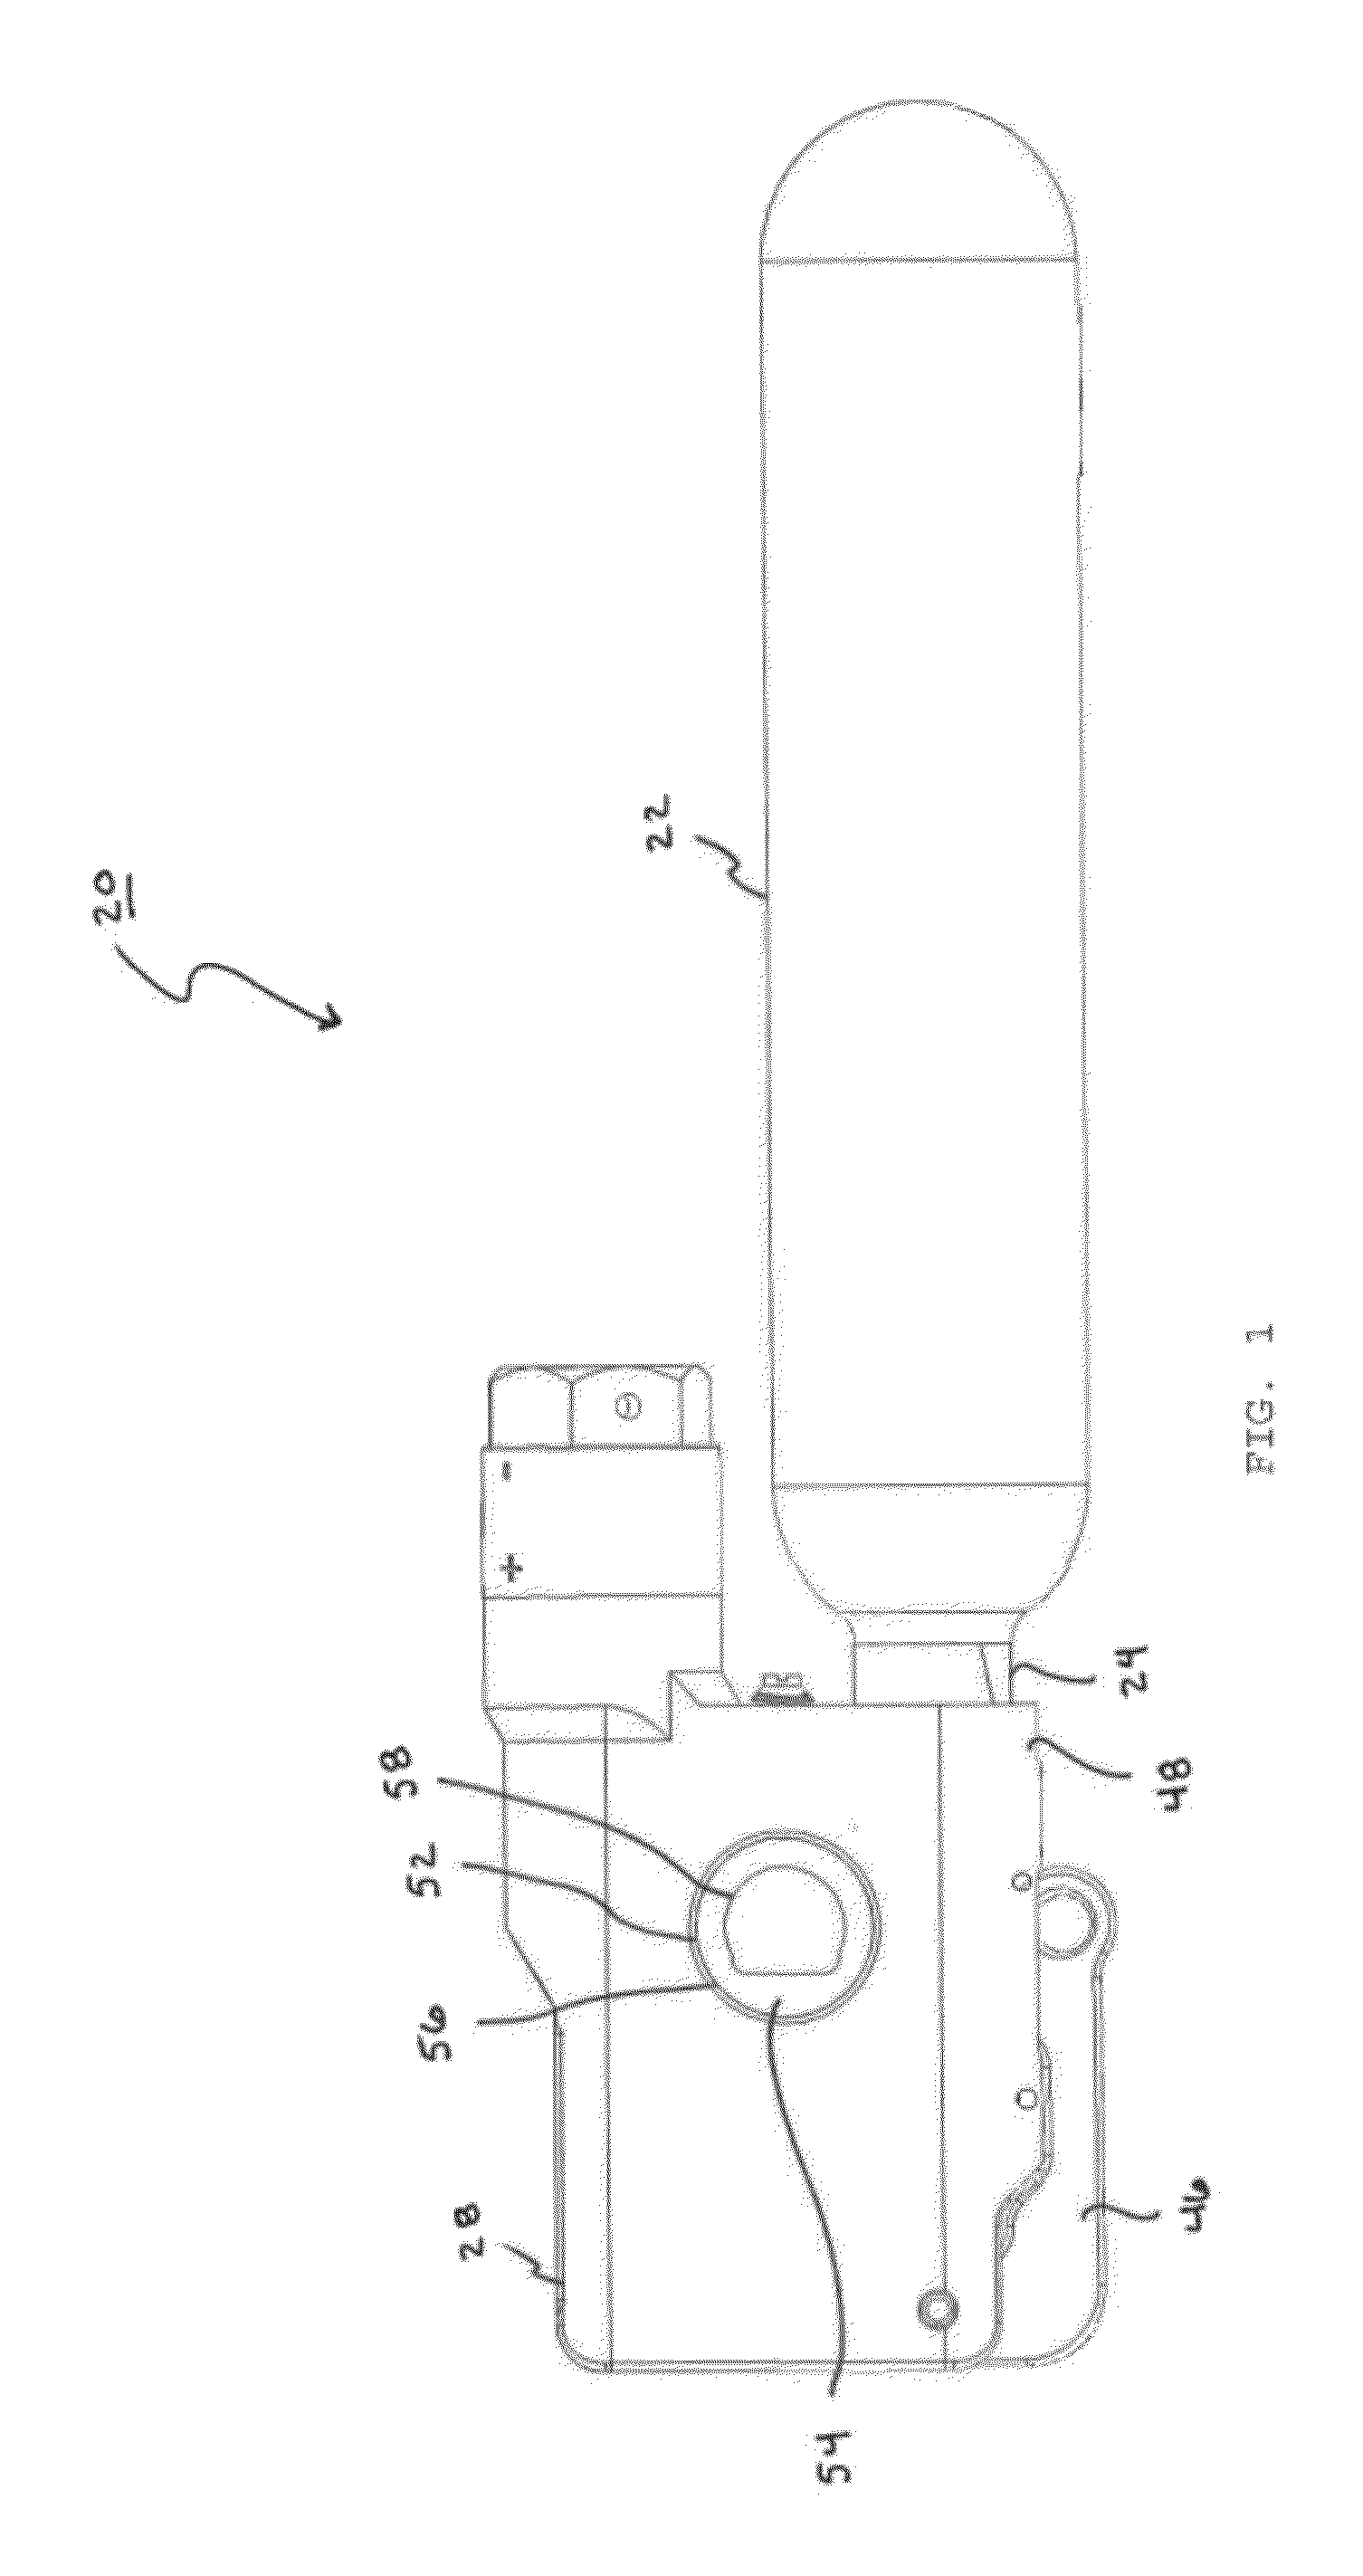 Water Actuated Pressurized Gas Release Device